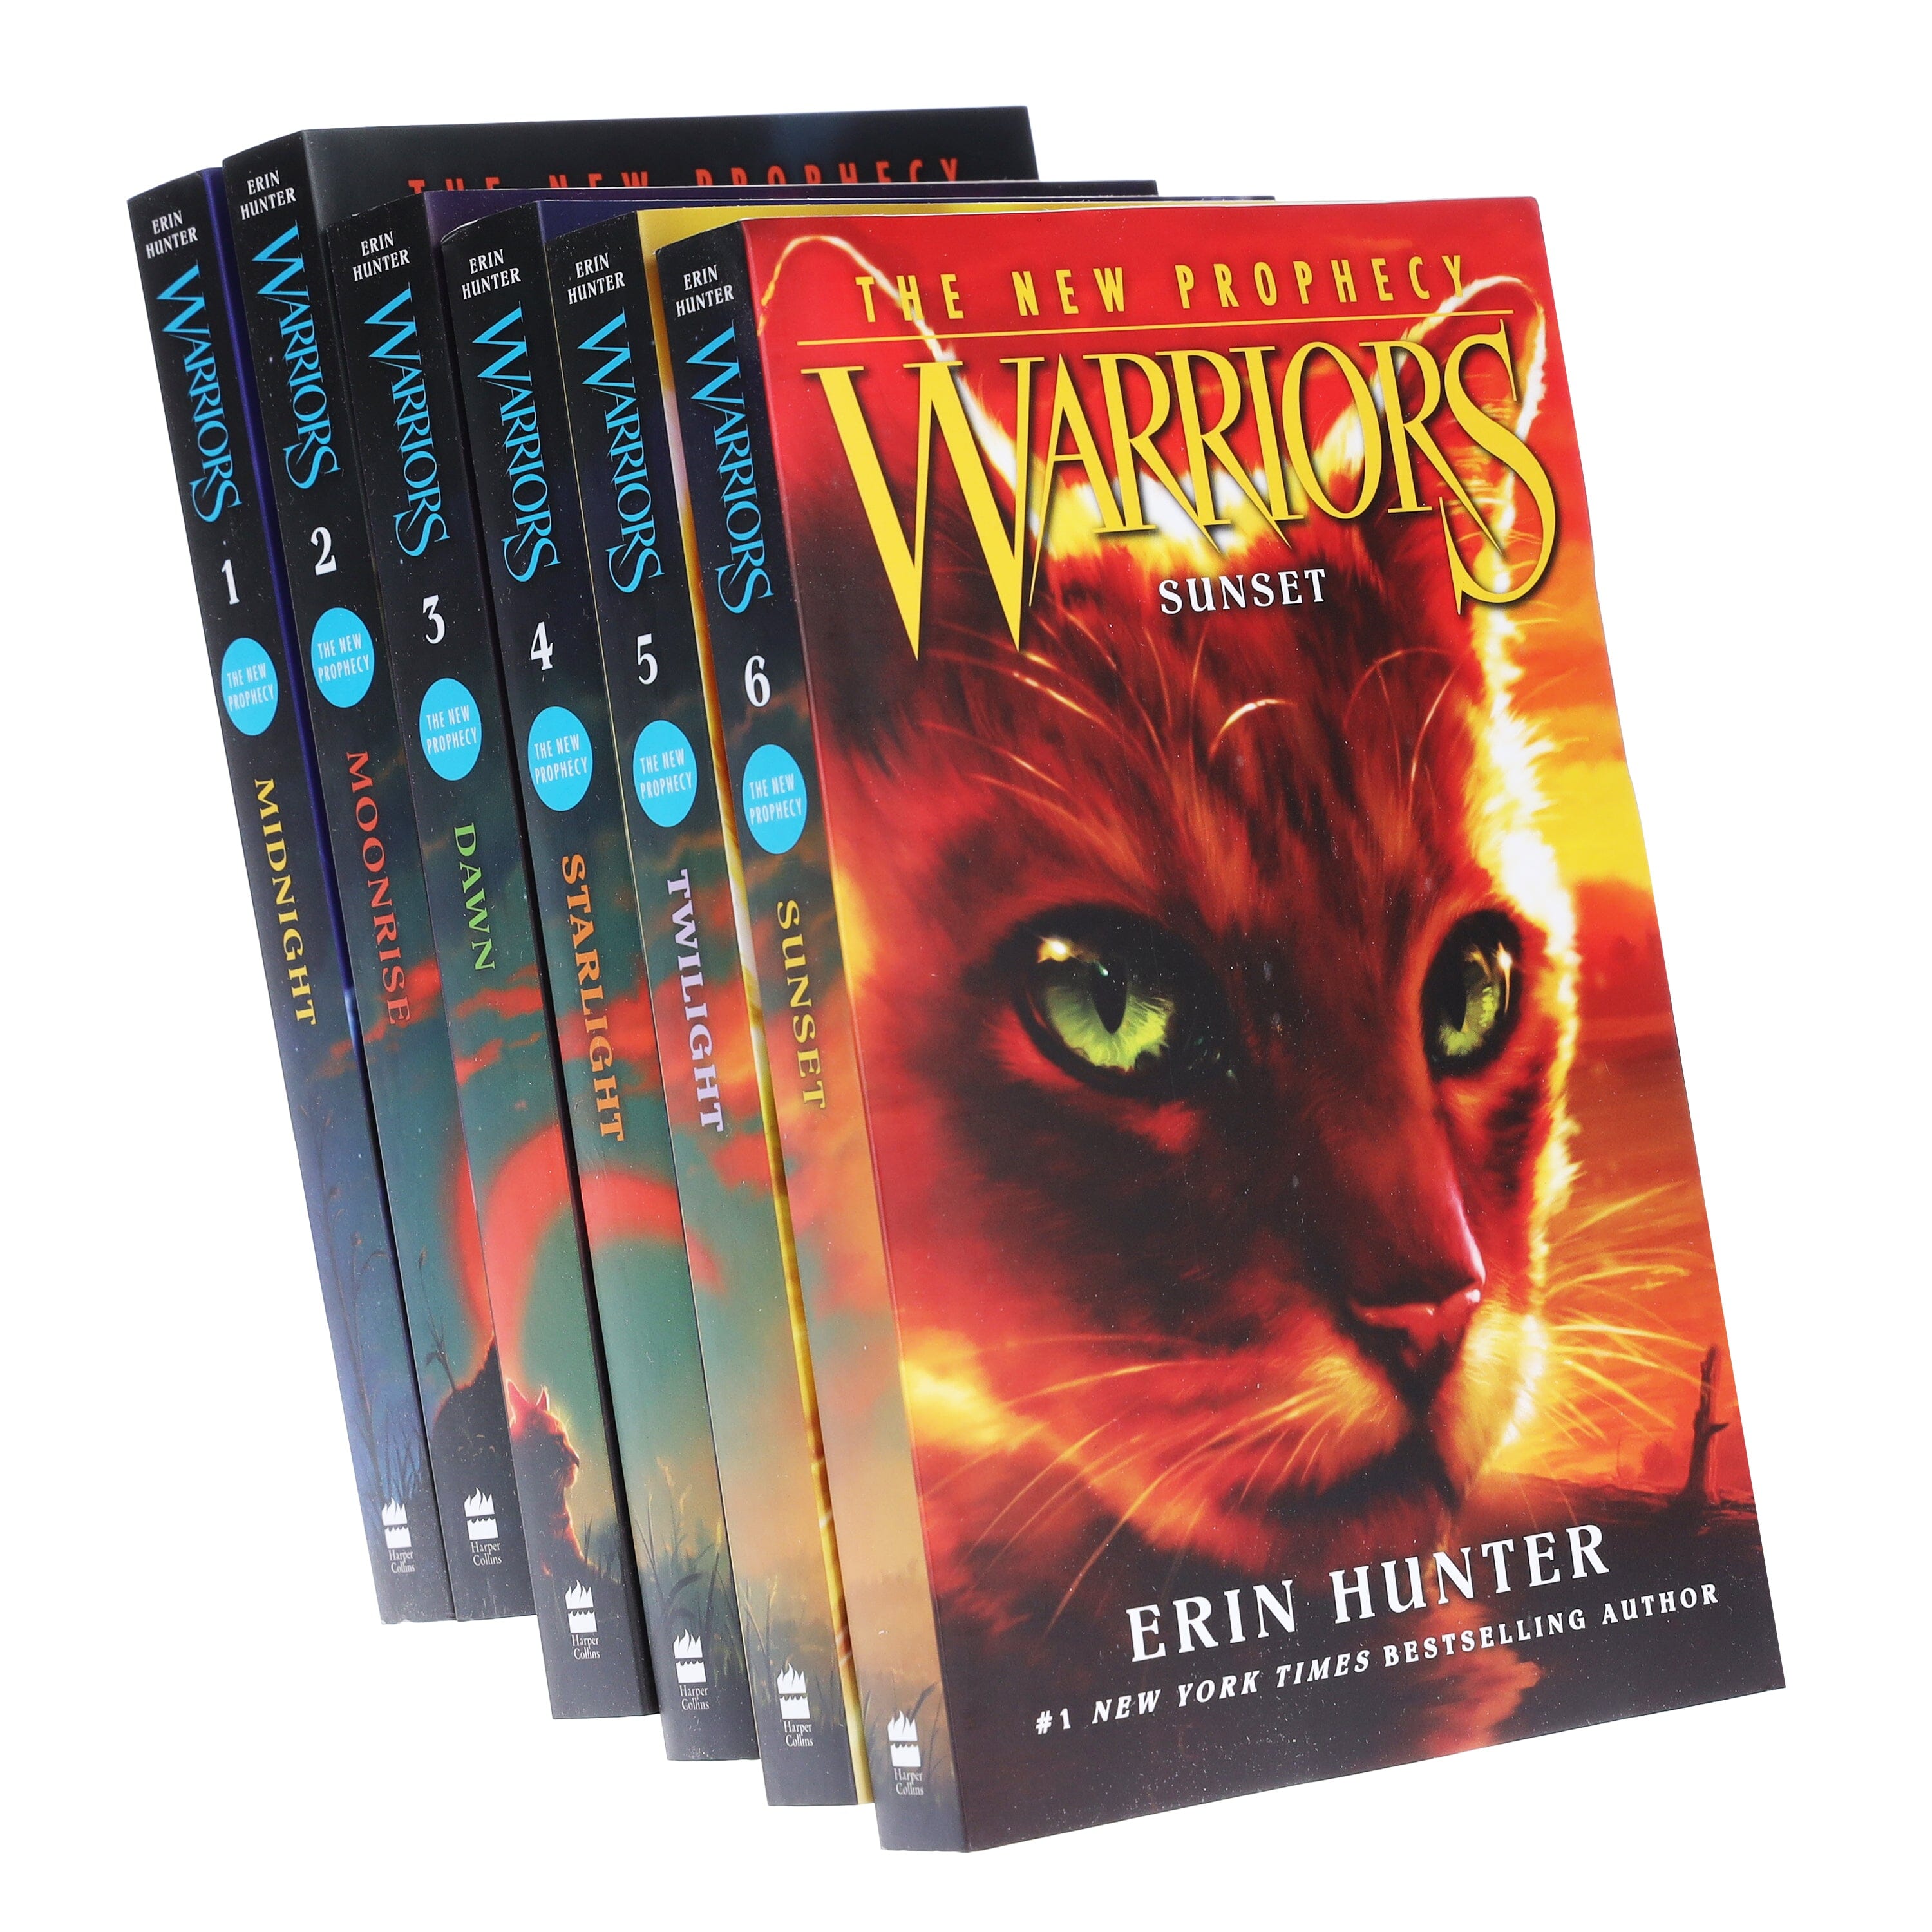 Warrior Cats Quiz: What Is My Warrior Cat Name?